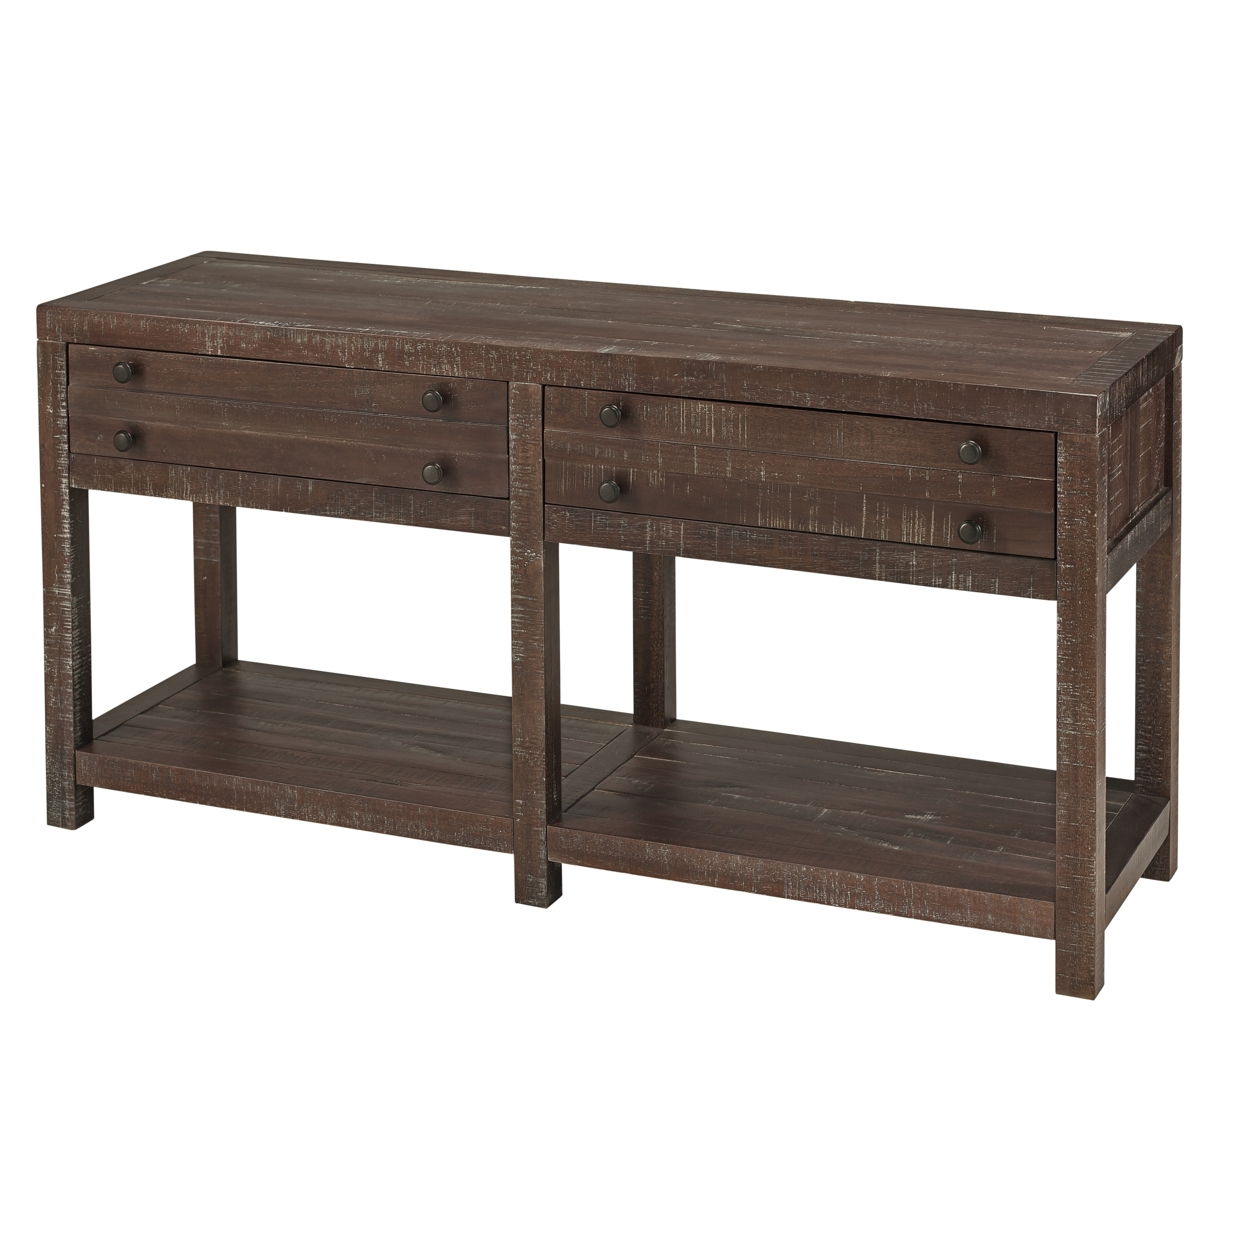 Wooden Two Drawer Console Table With Bottom Shelf, Brown- Saltoro Sherpi